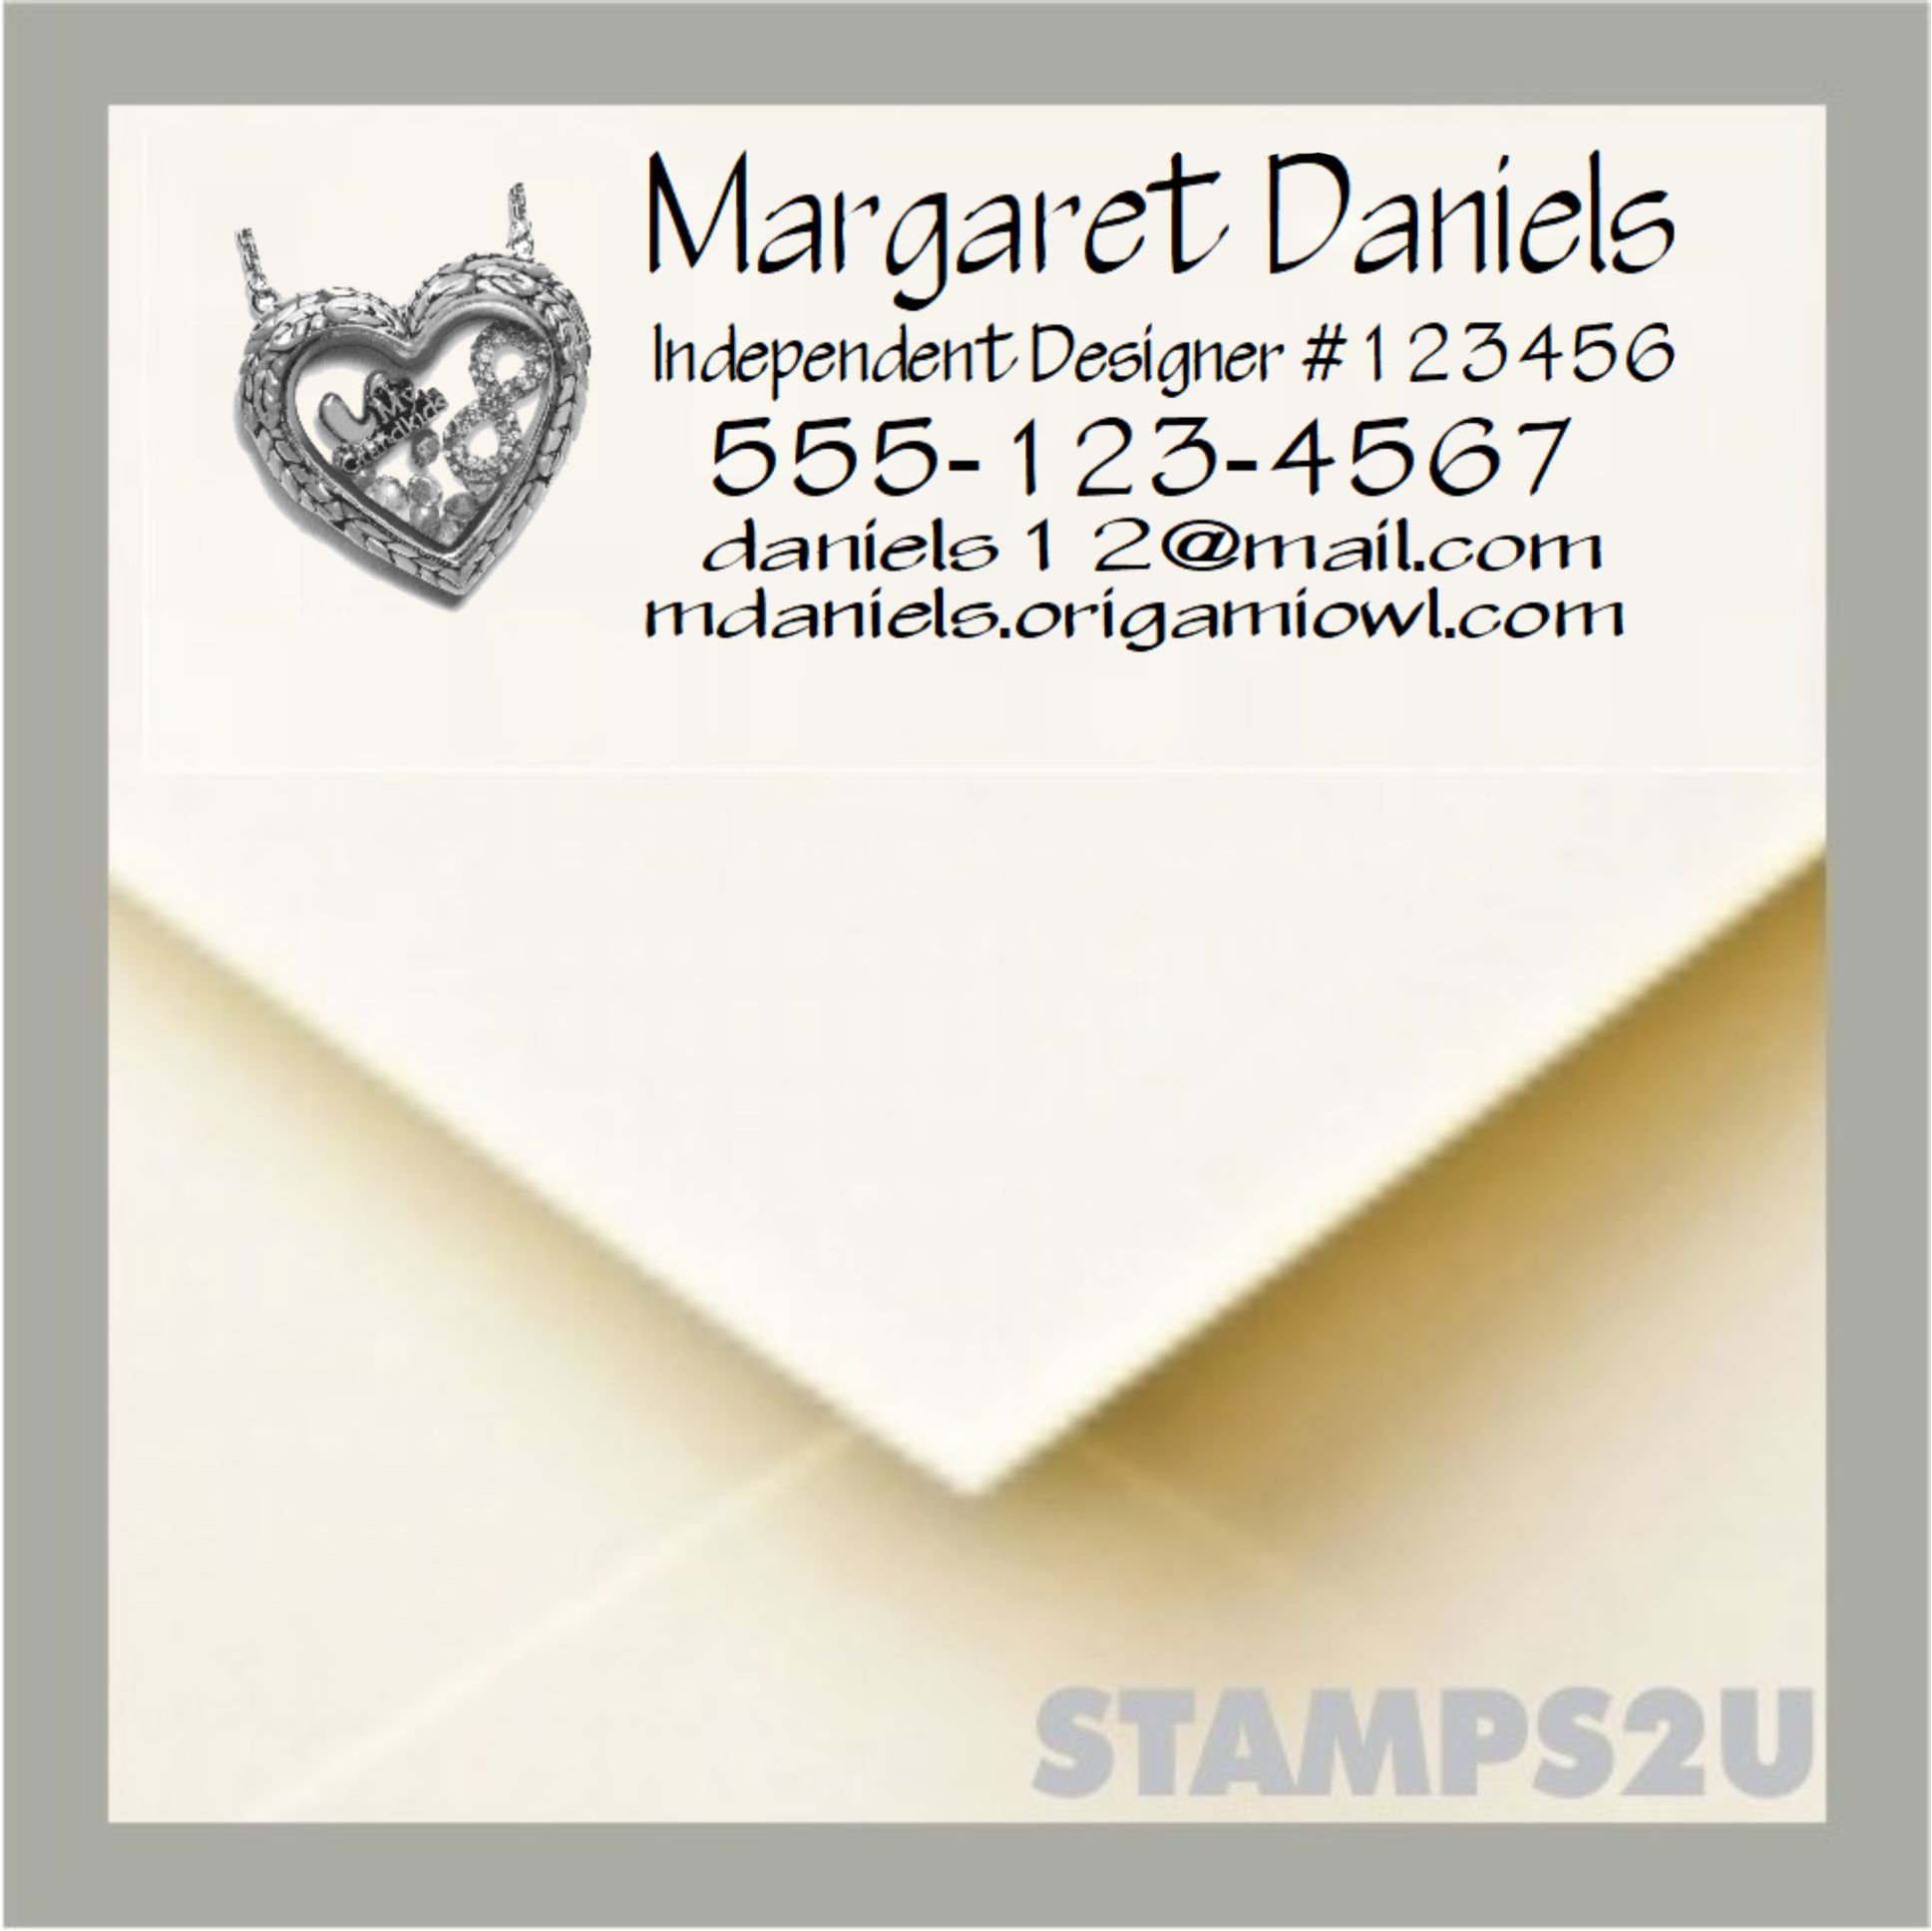 Origami Owl Designer Login Origami Owl Designer Pre Inked Stamp To Use For Your Invoices And Catalogs 2770 Stop Using Labels